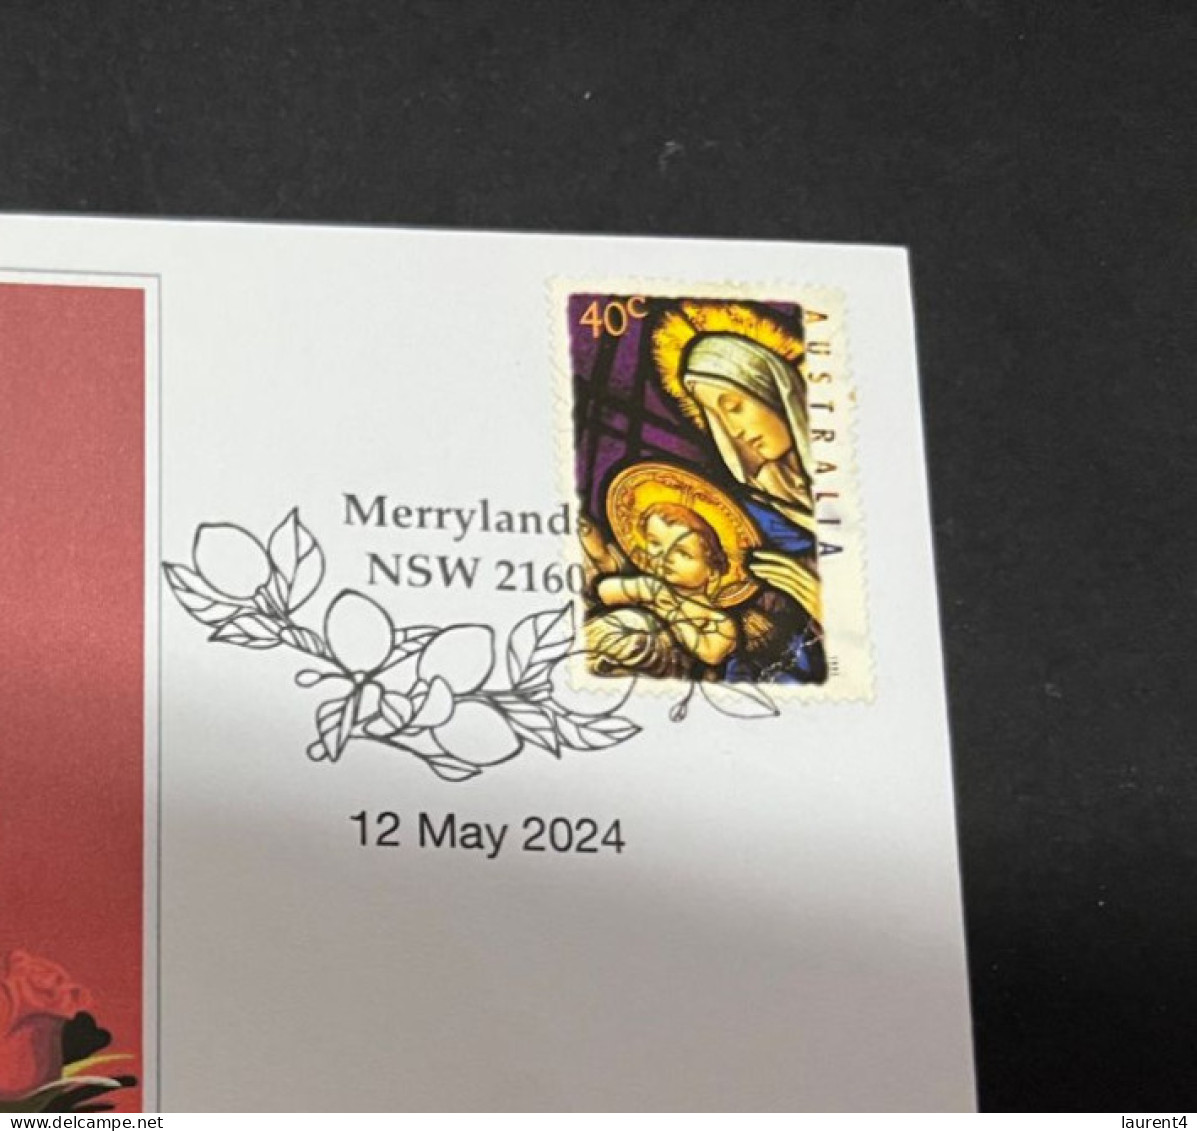 12-5-2024 (4 Z 47A) Mother's Day 2024 (12-5-2024 In Australia) Virgin Mary Stamp - Mother's Day